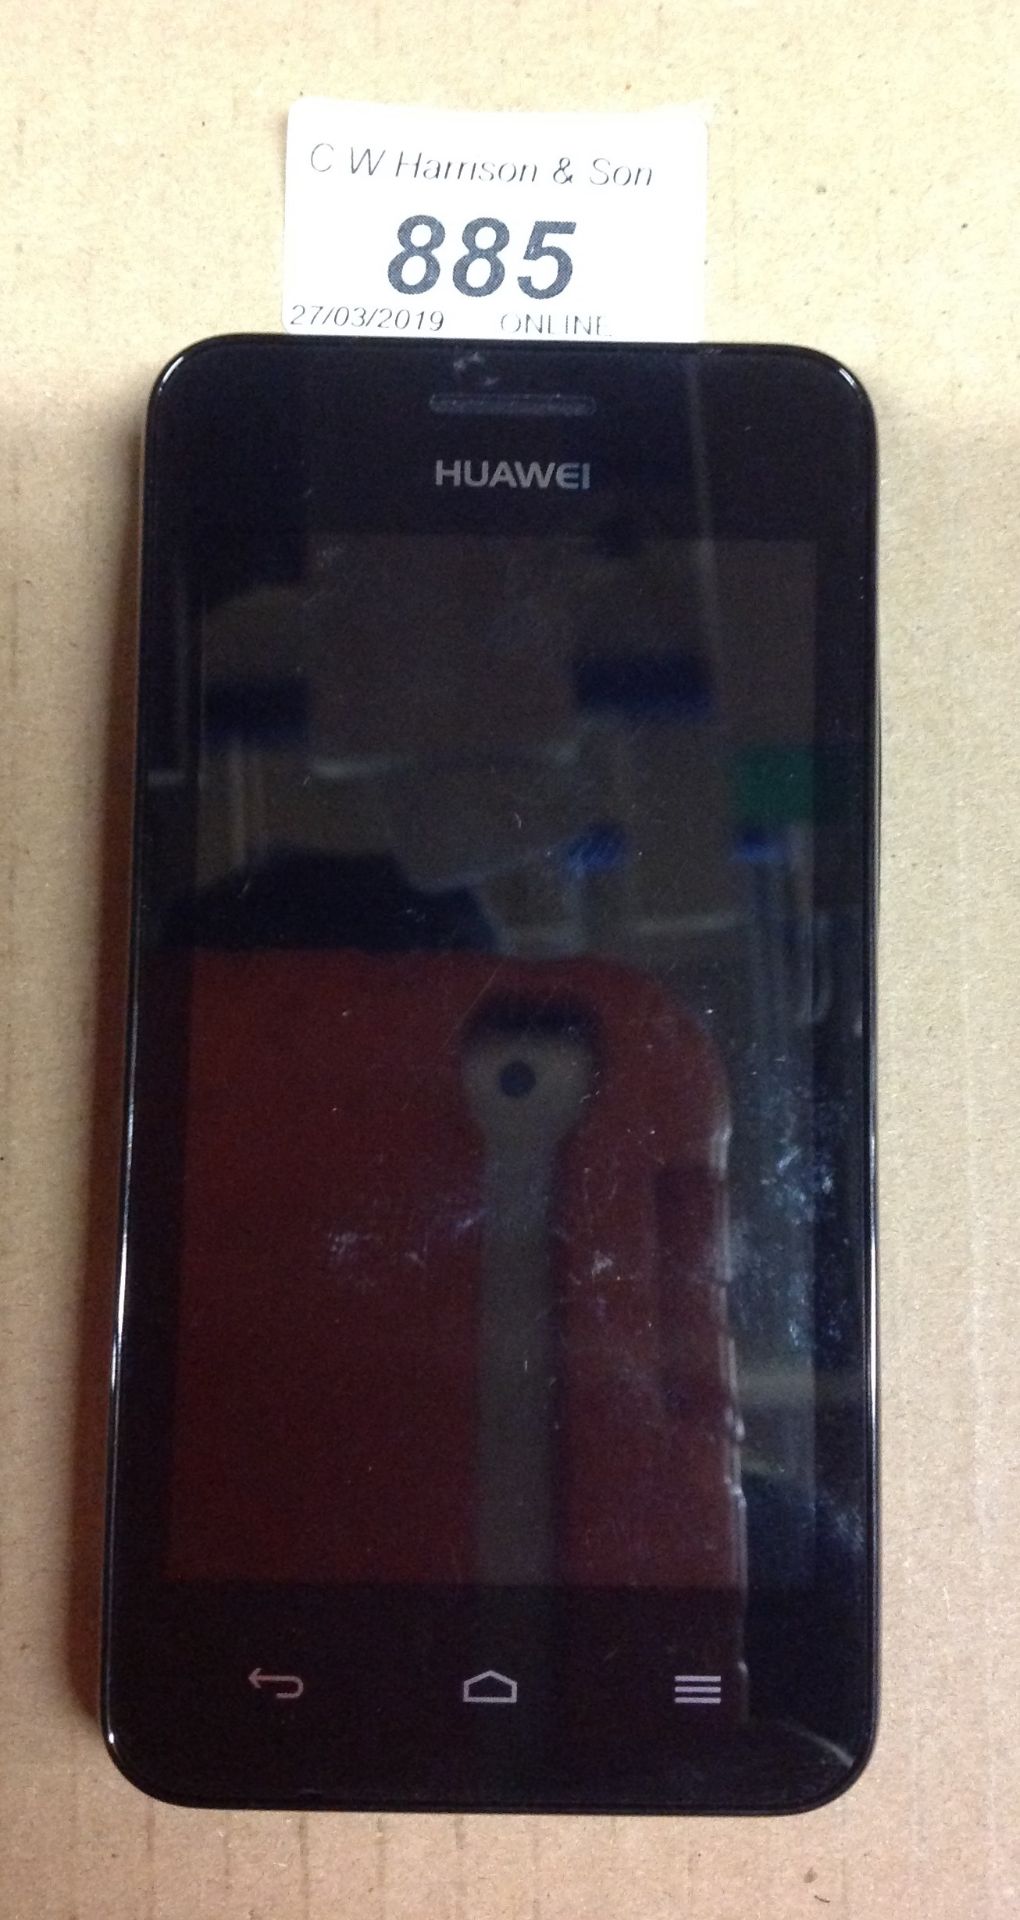 Huawei Y330-U01 mobile phone (no charger)